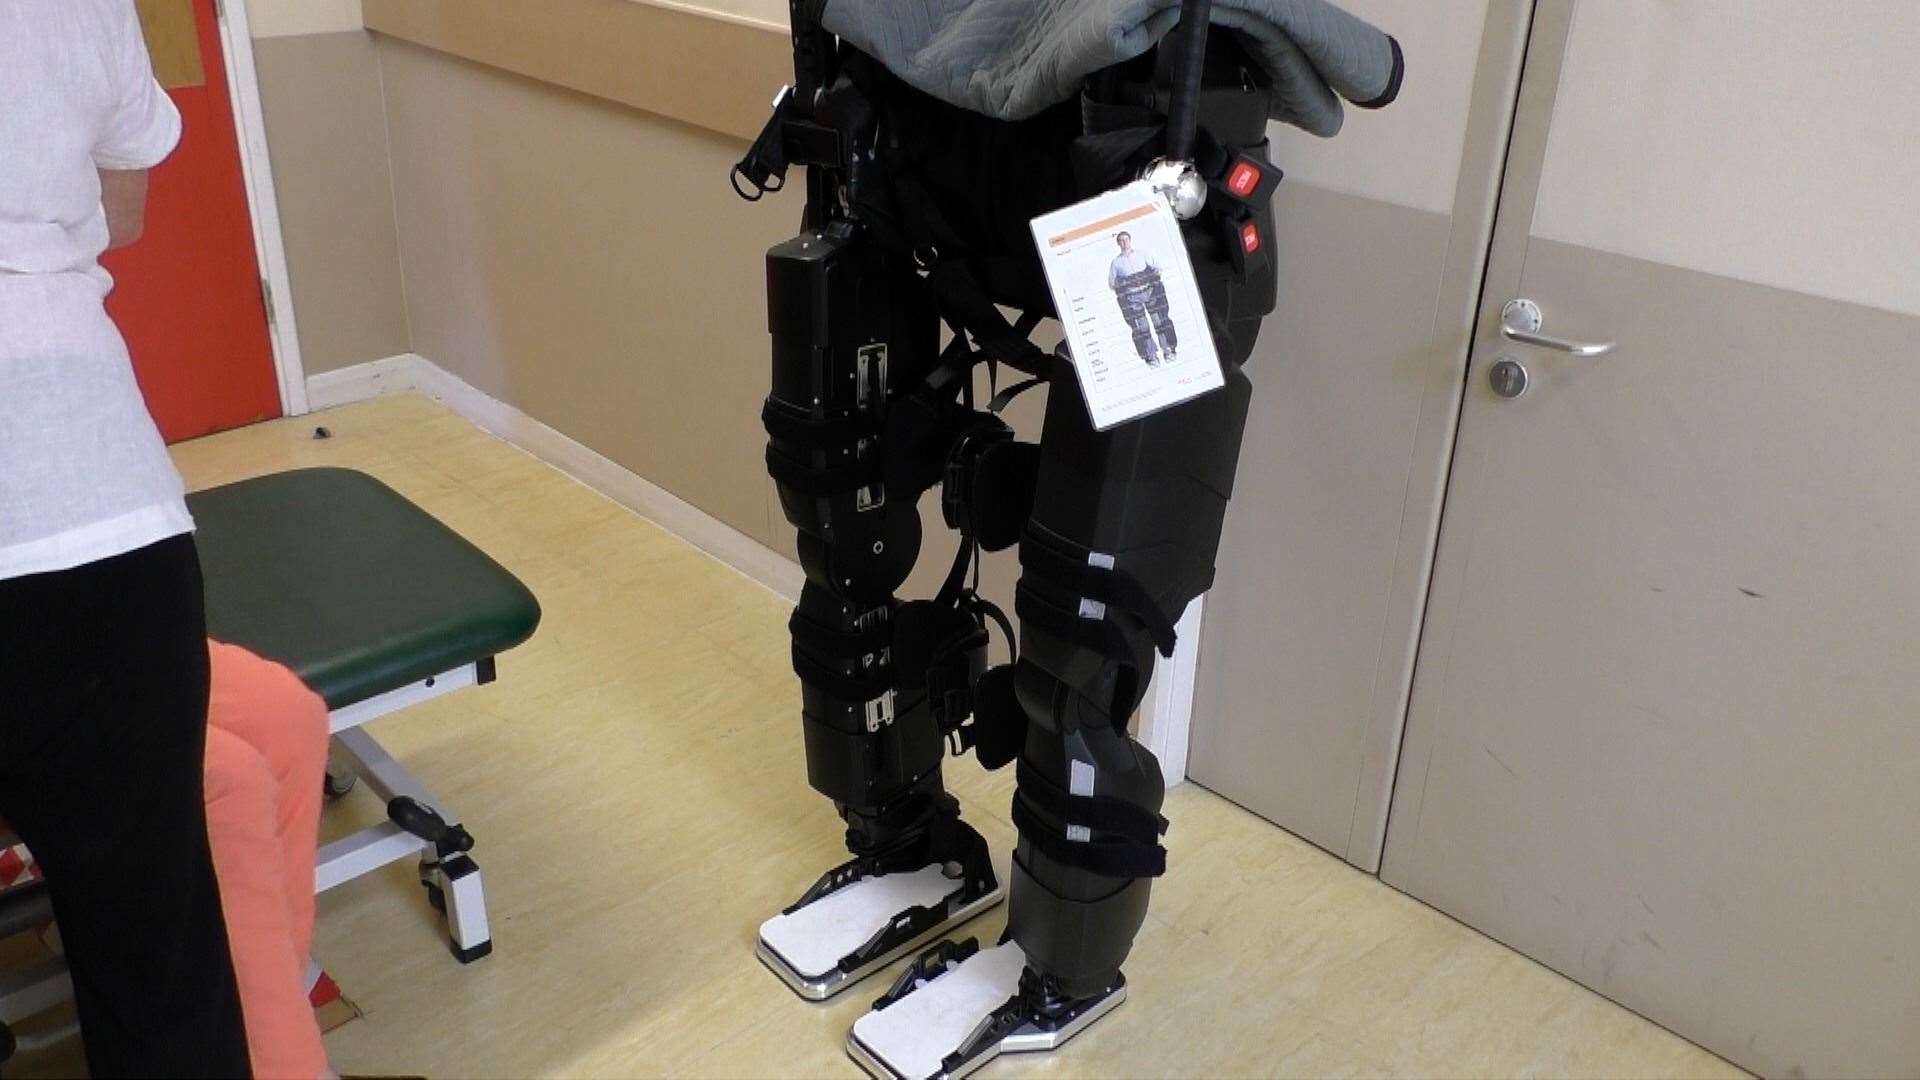 The robotic legs are designed to build core and leg strength